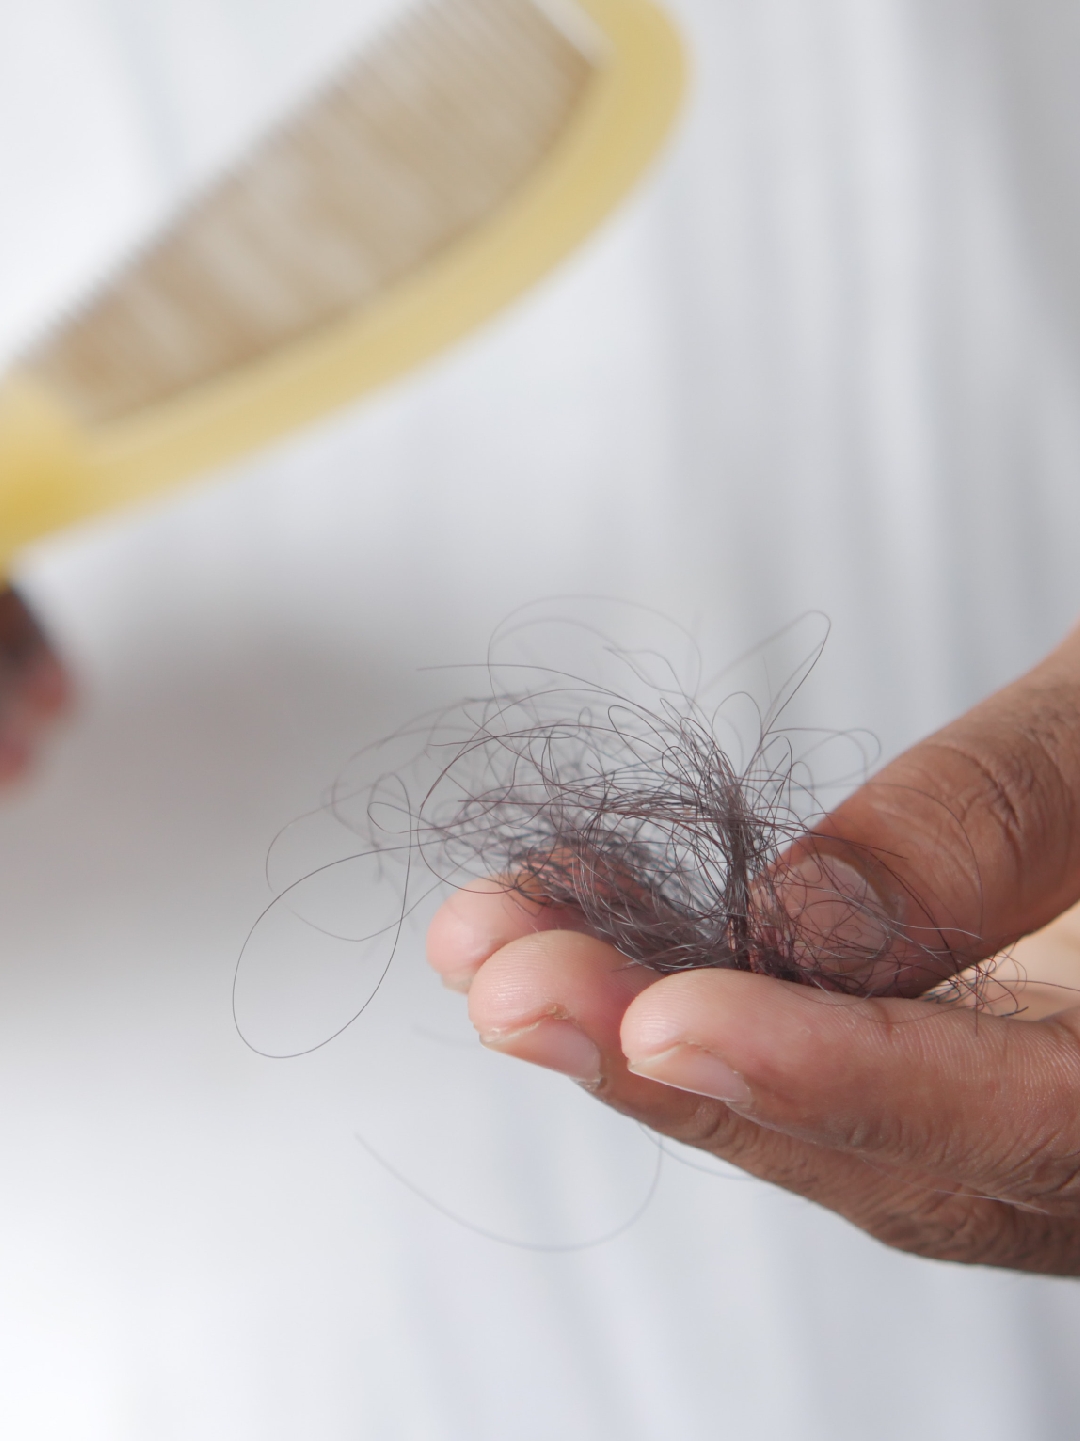 What is alopecia areata and how is it managed?